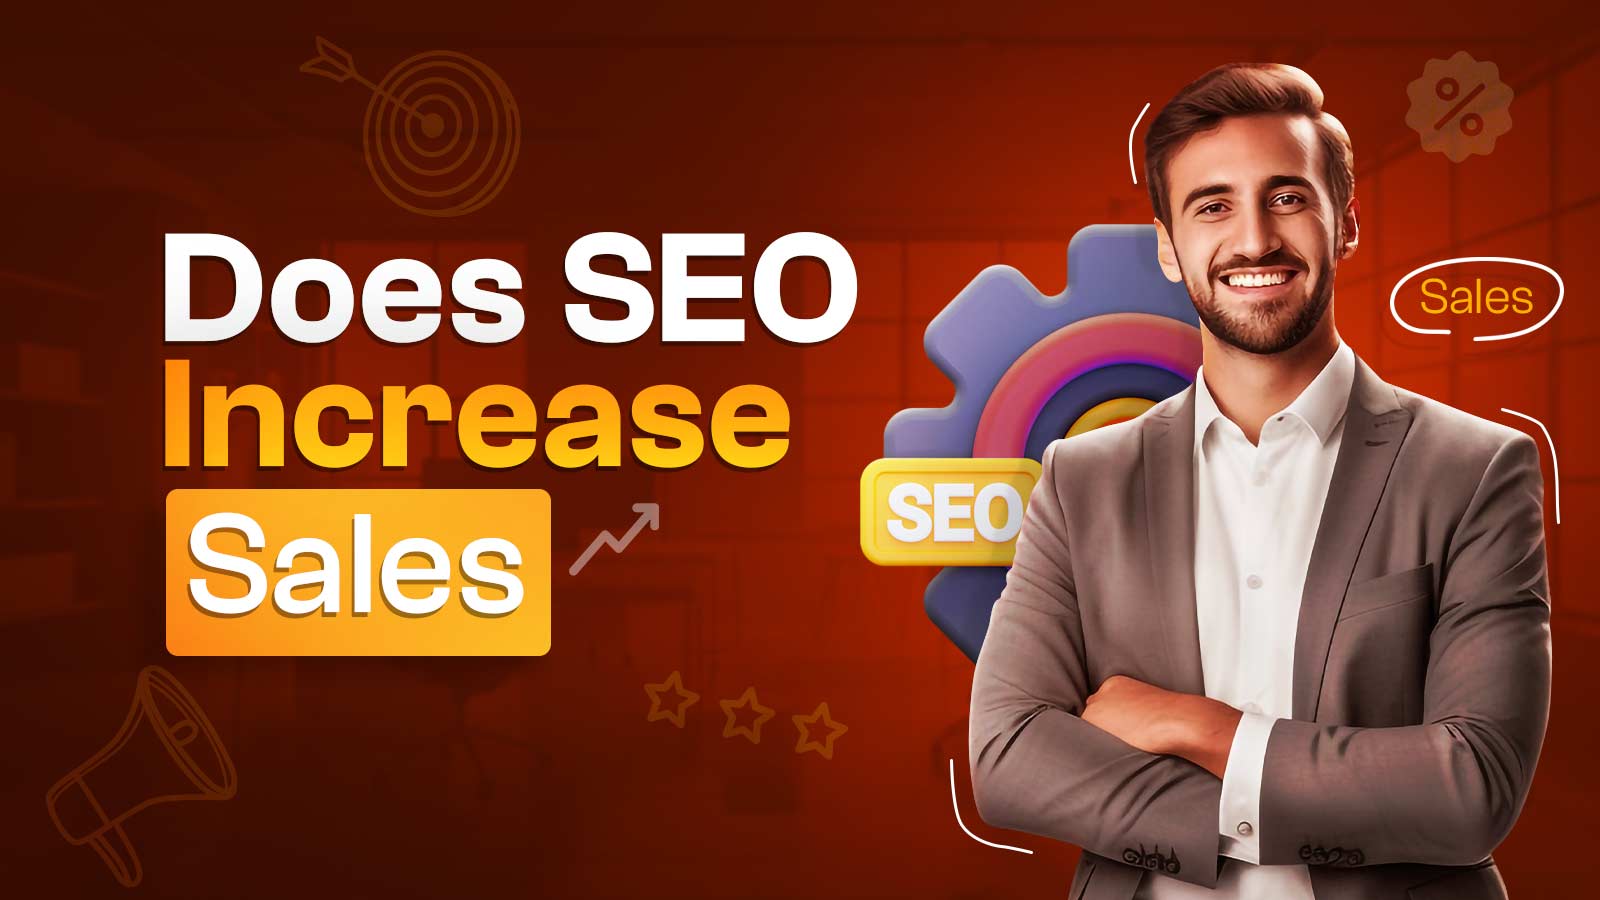 How Does SEO Increase Sales And Leads For Any Business?